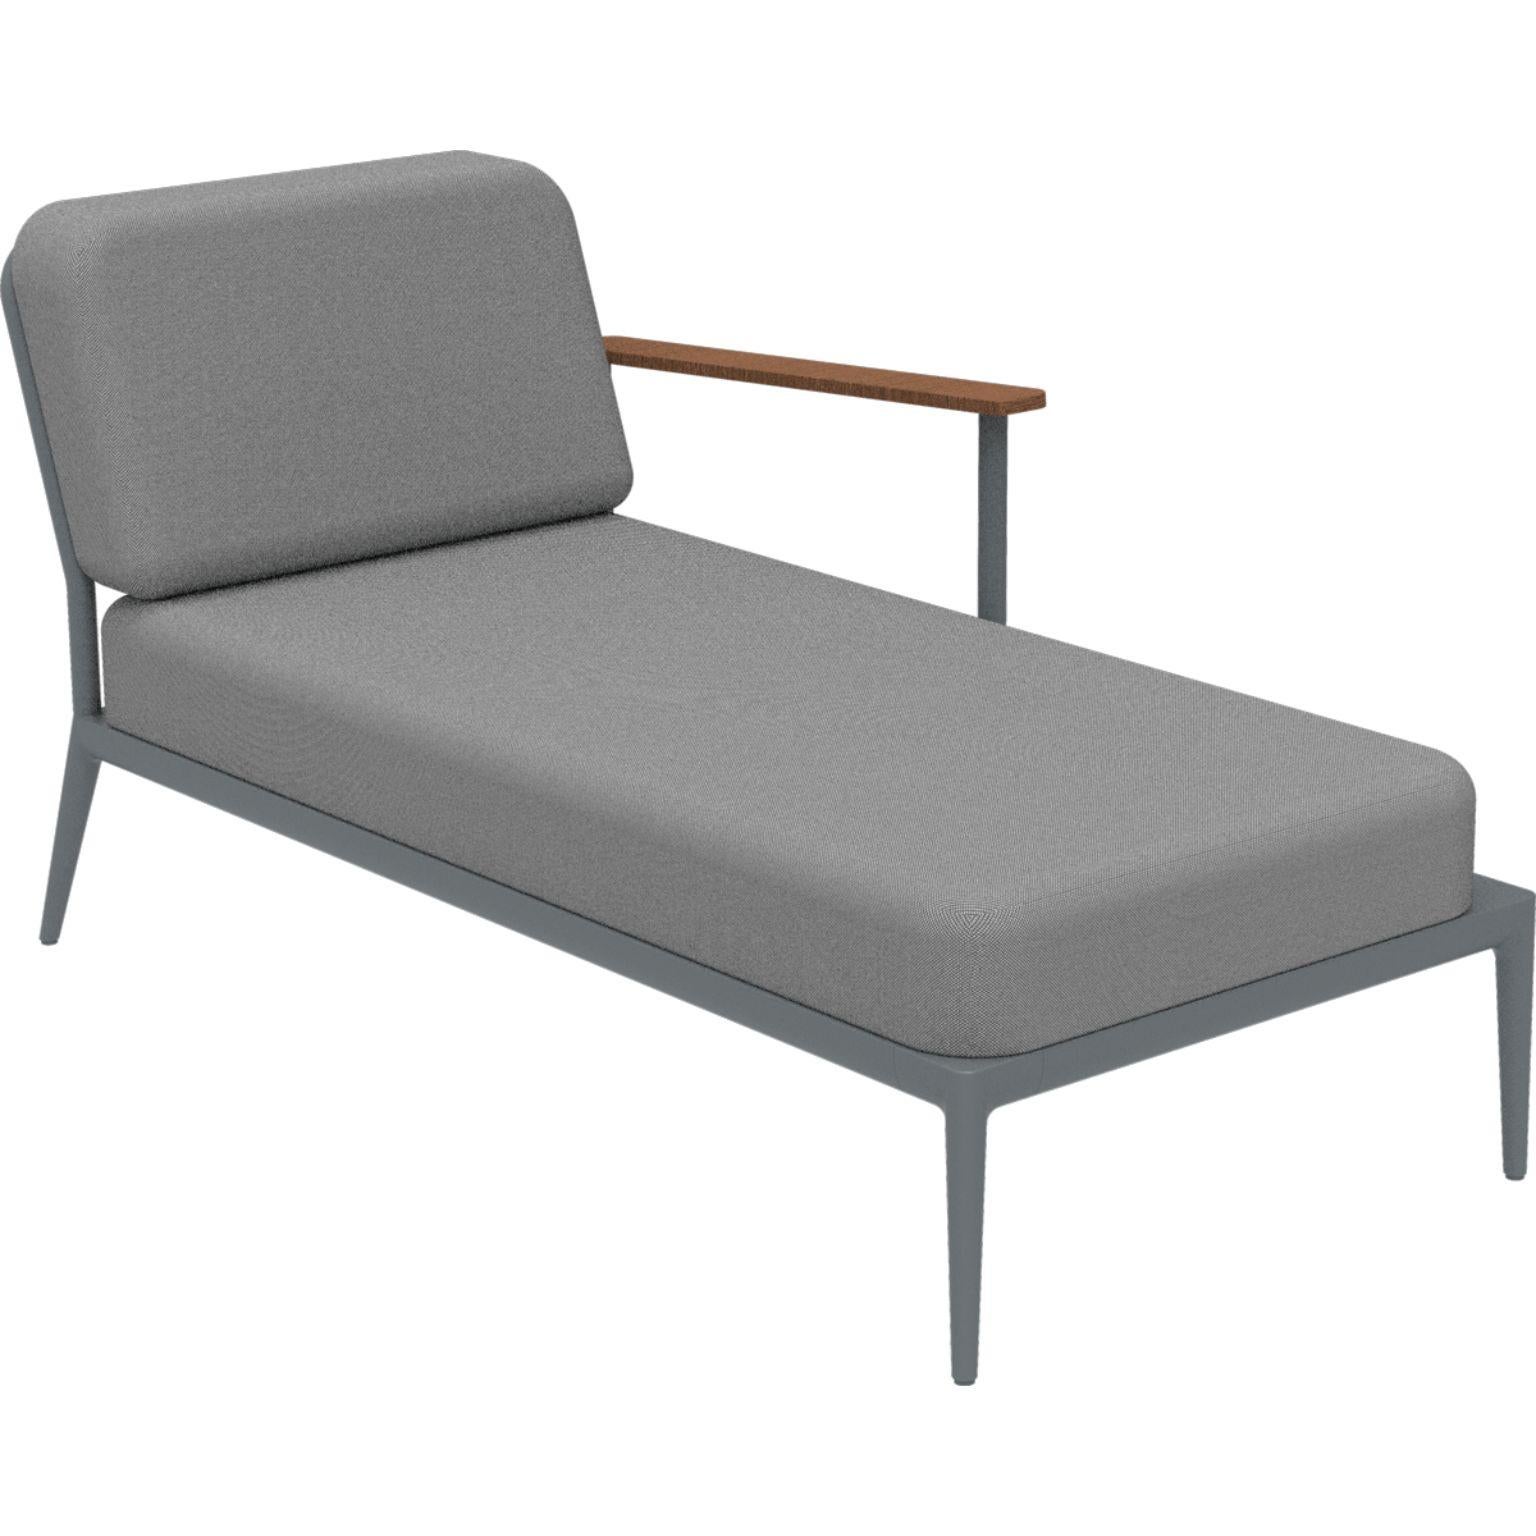 Nature Grey Left Chaise Longue by MOWEE
Dimensions: D155 x W76 x H81 cm (seat height 42 cm).
Material: Aluminum, upholstery and Iroko Wood.
Weight: 28 kg.
Also available in different colors and finishes. Please contact us.

An unmistakable